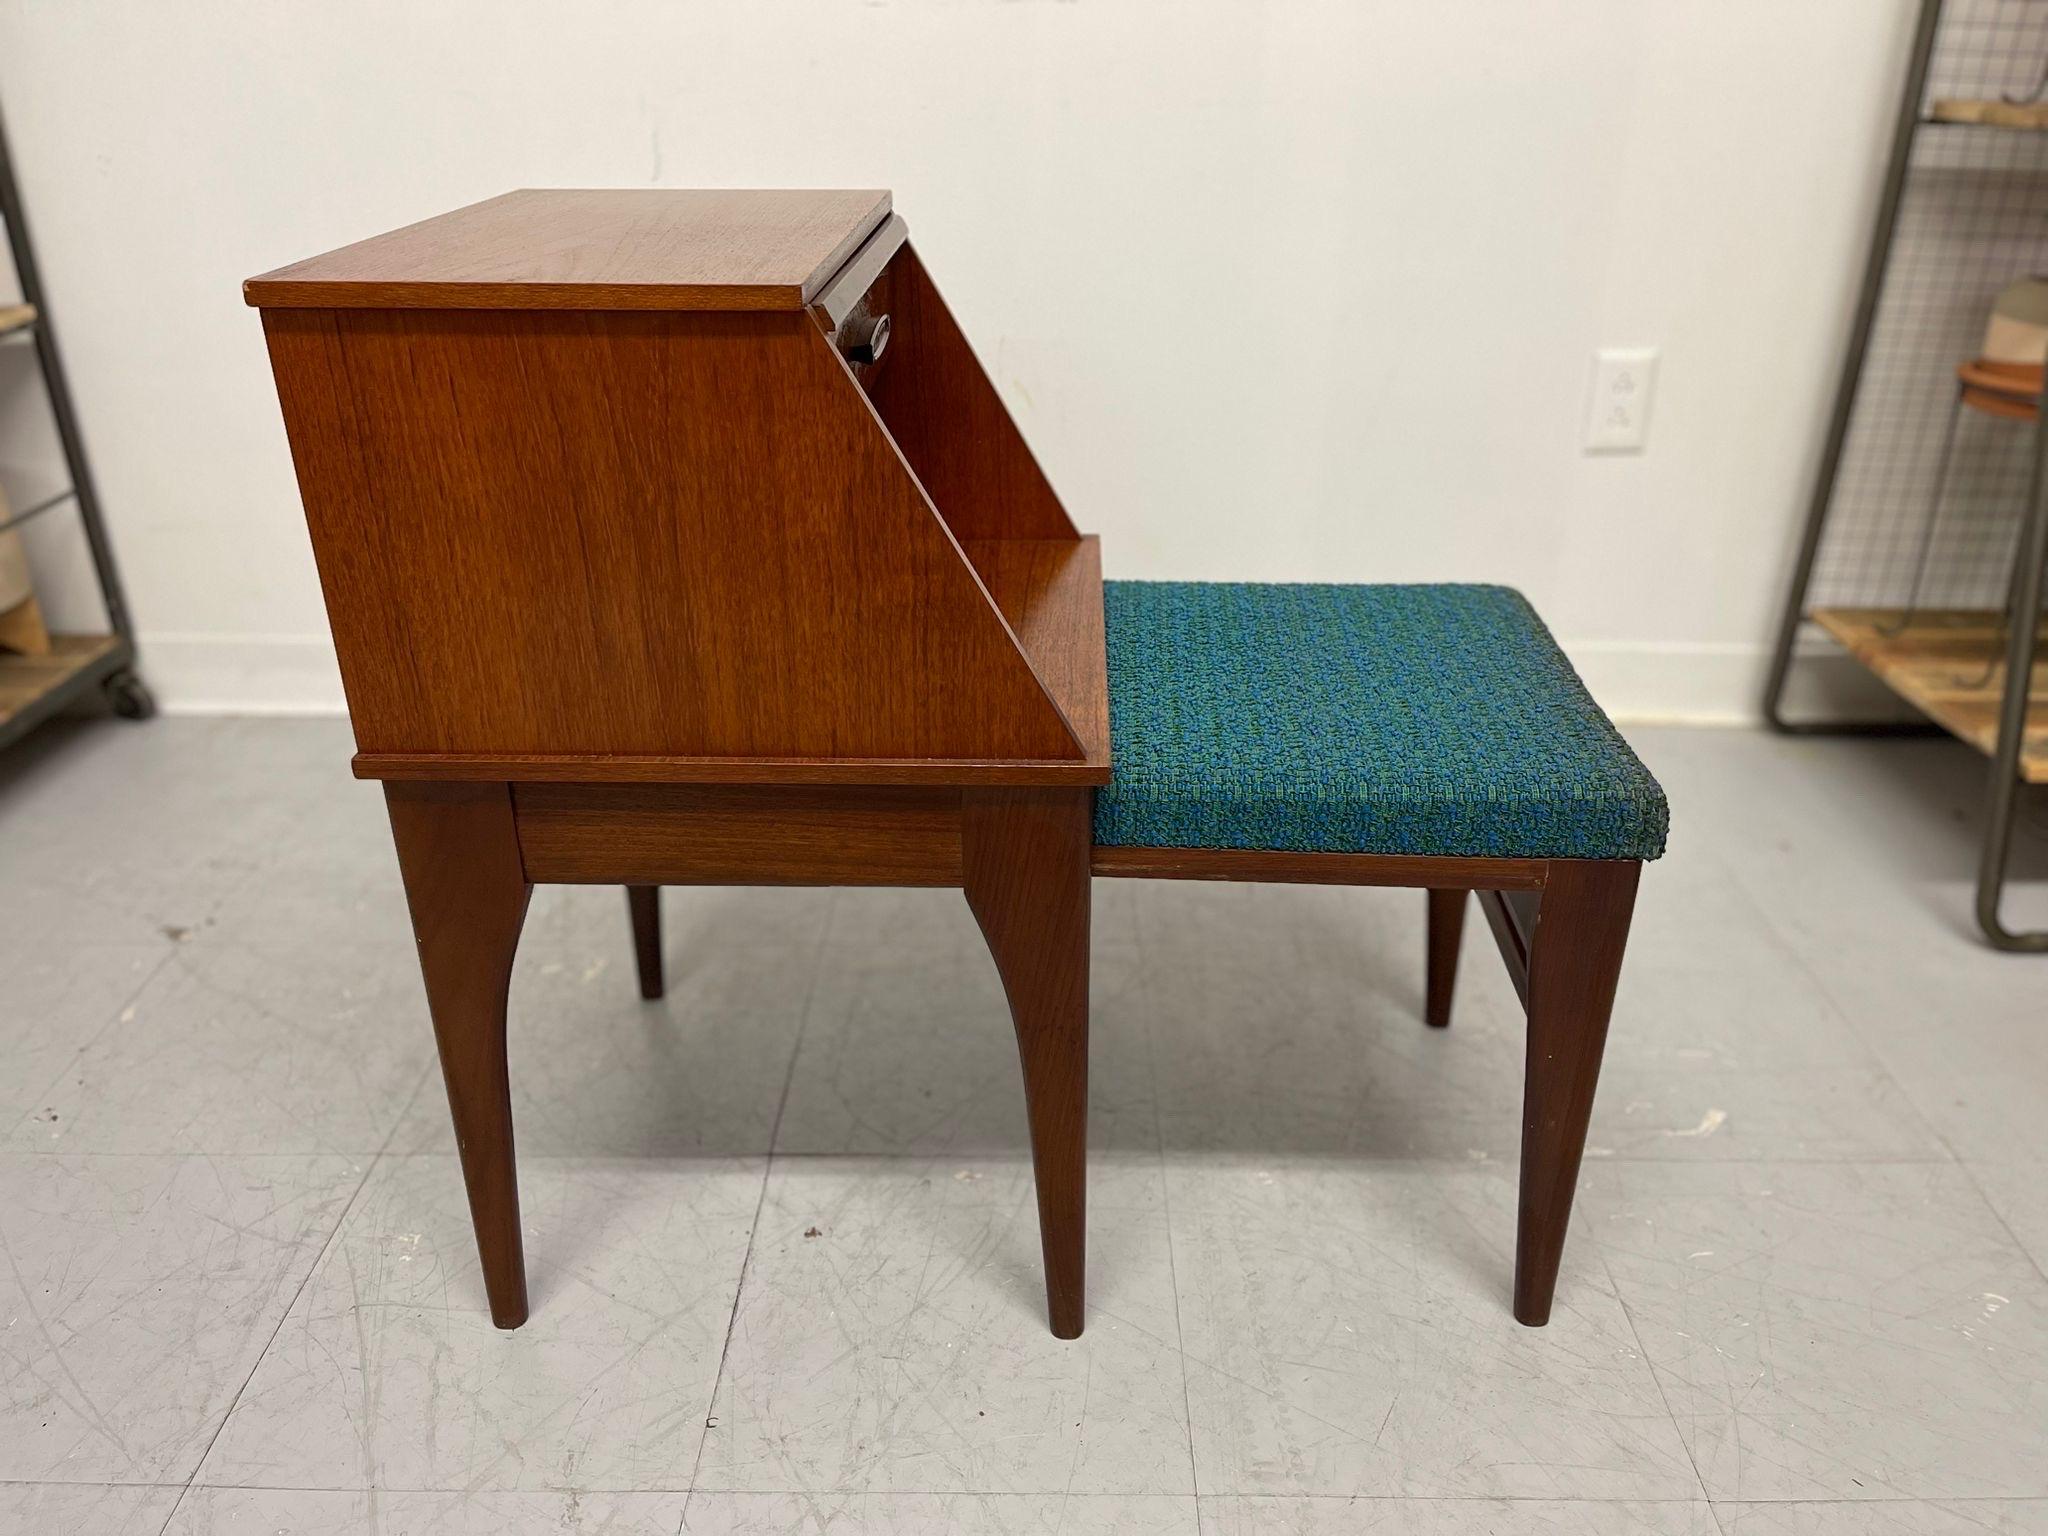 Fabric Vintage Mid Century Modern Chippy Telephone Seat With Pull Out Cushion Table. 